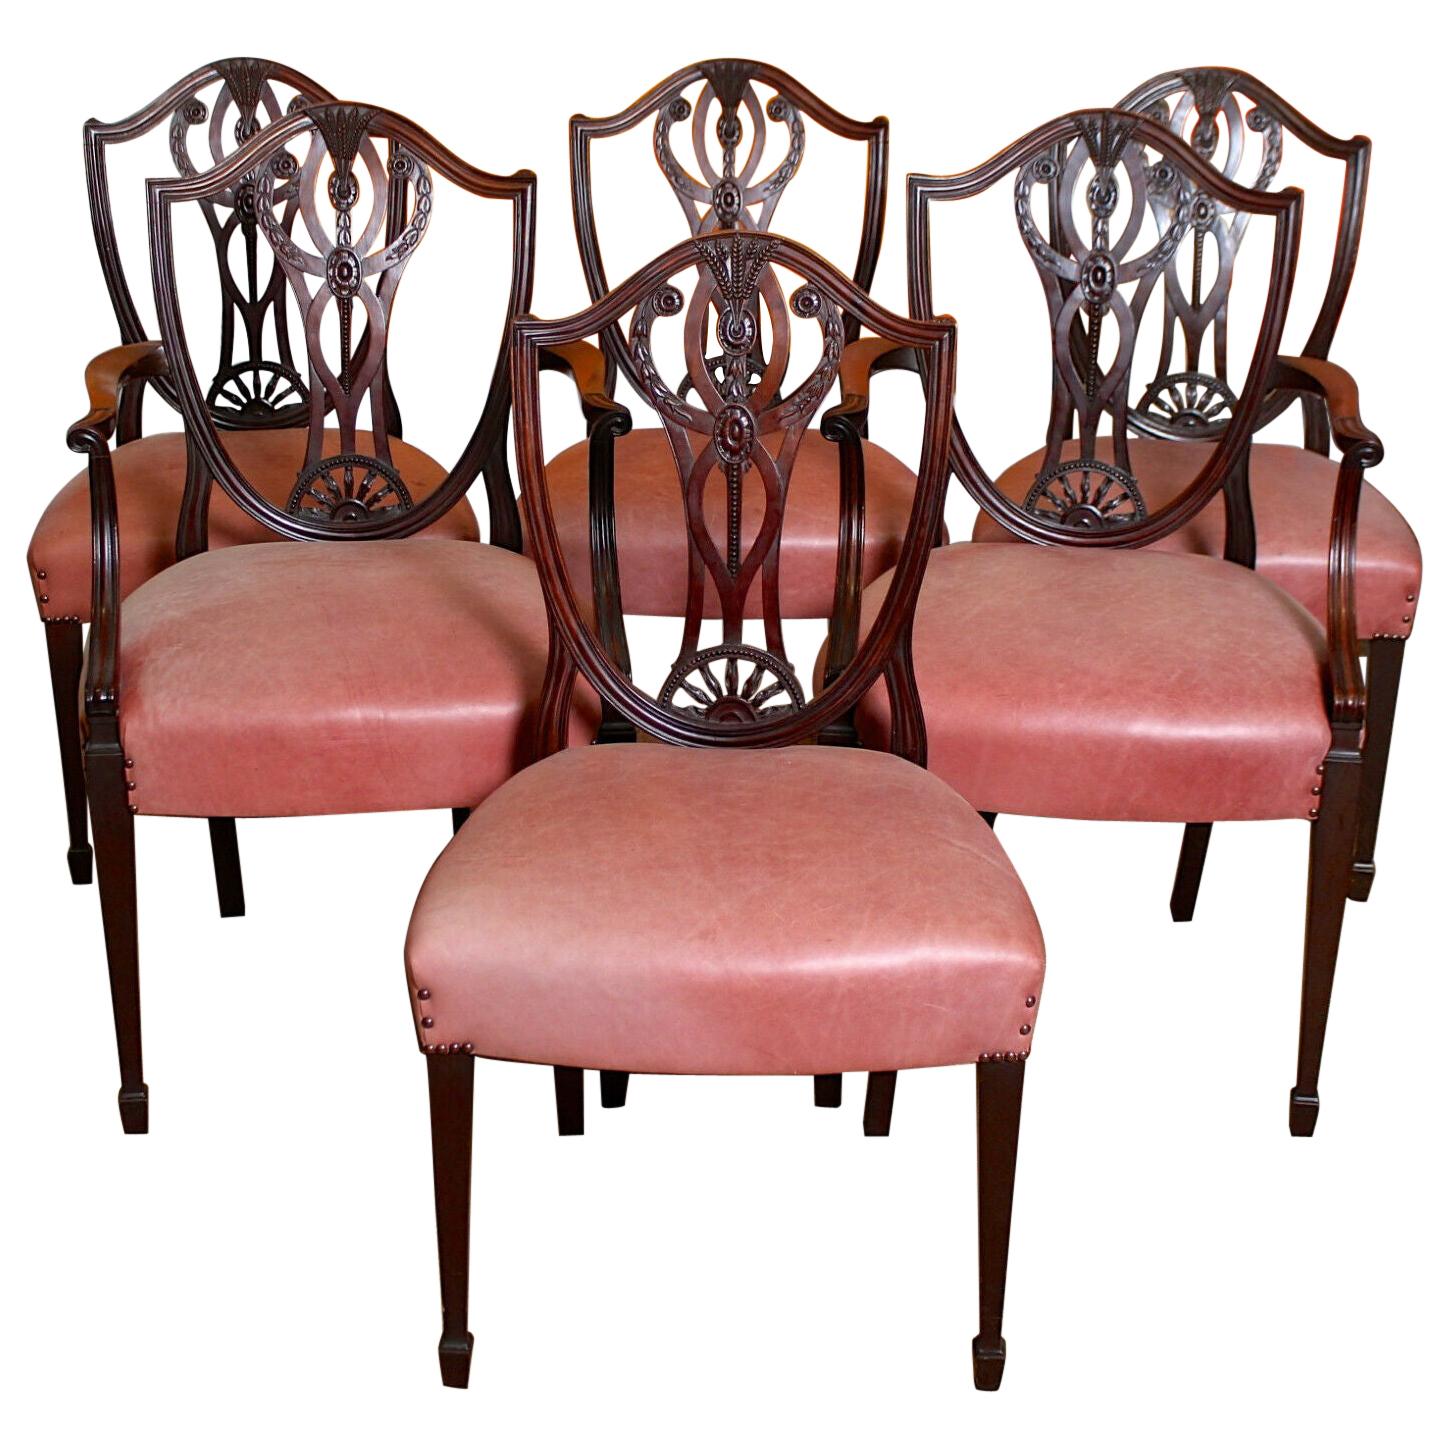 6 English Dining Chairs Hepplewhite Mahogany Leather, 19th Century For Sale